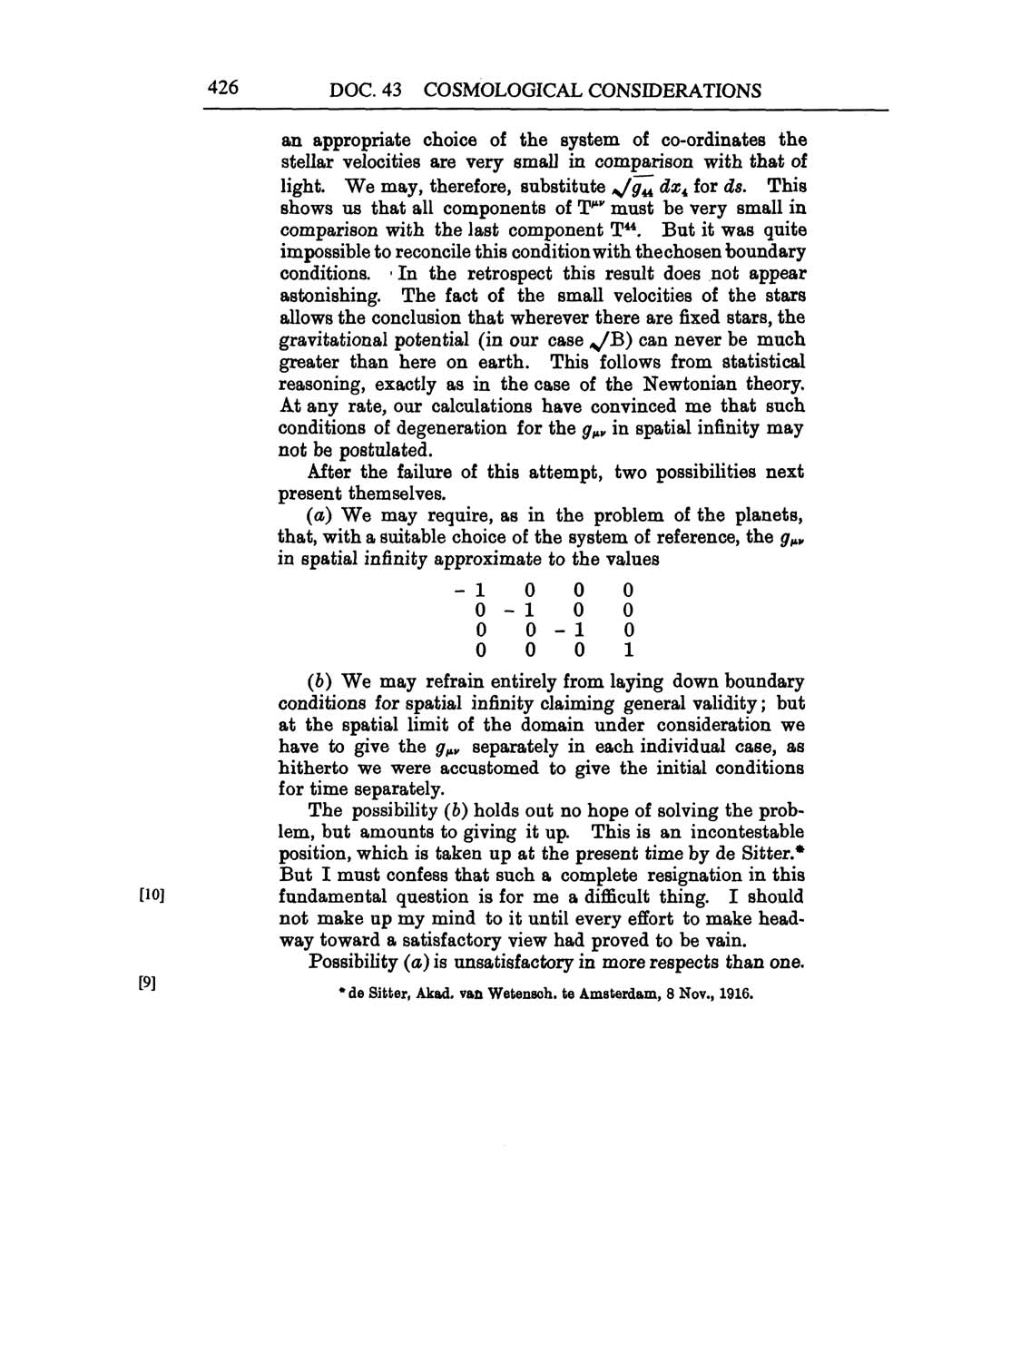 Volume 6: The Berlin Years: Writings, 1914-1917 (English translation supplement) page 426